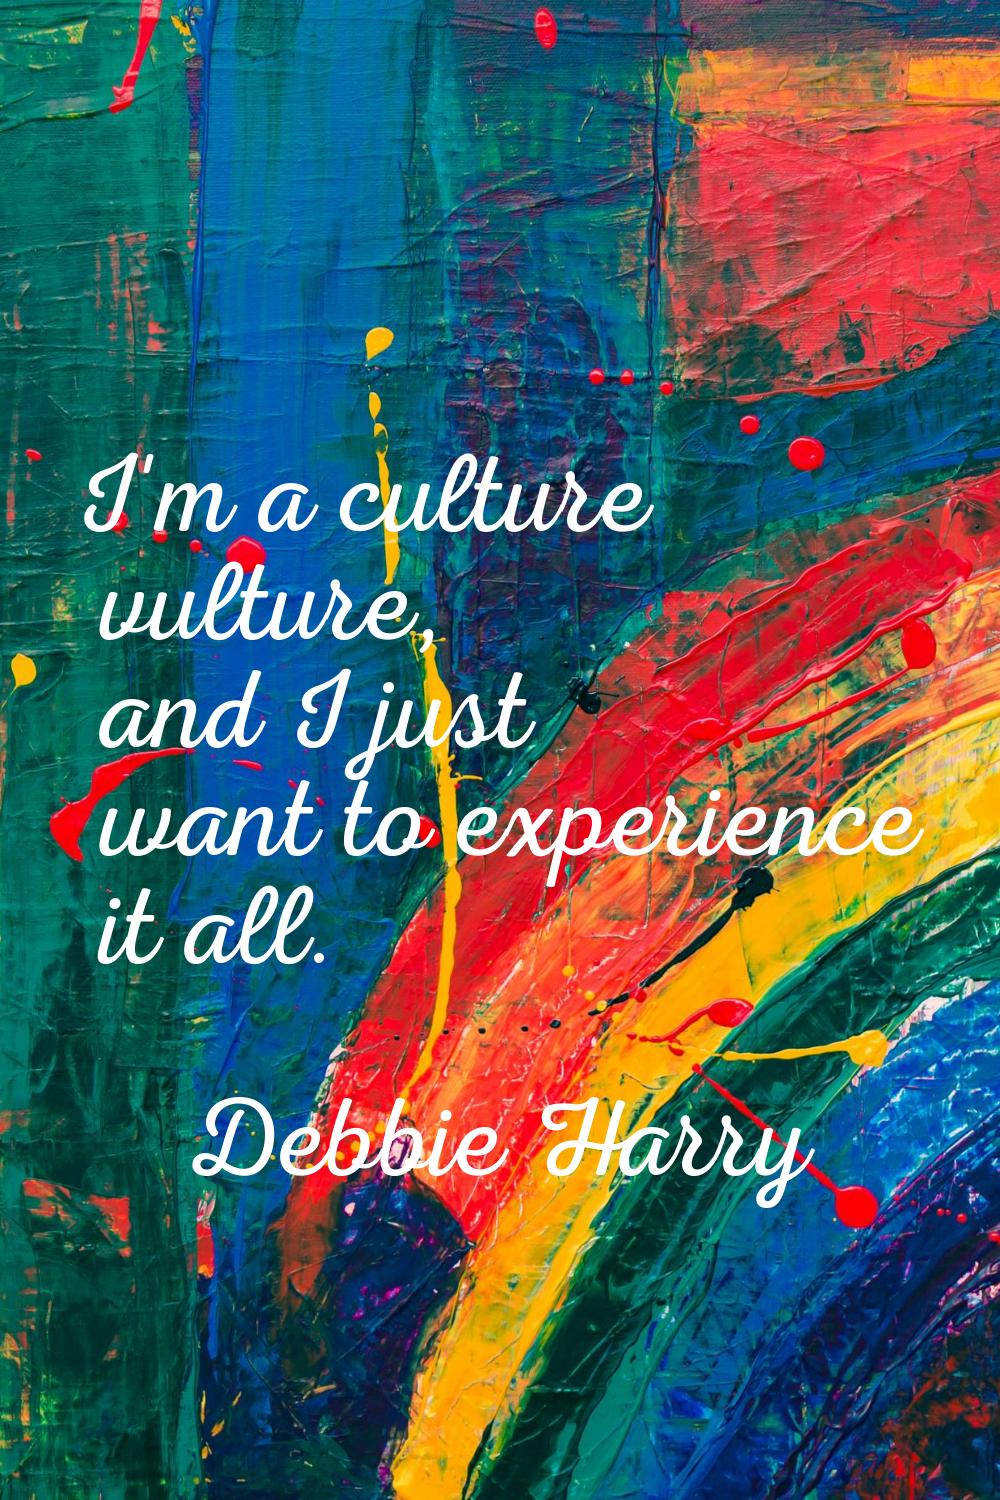 I'm a culture vulture, and I just want to experience it all.